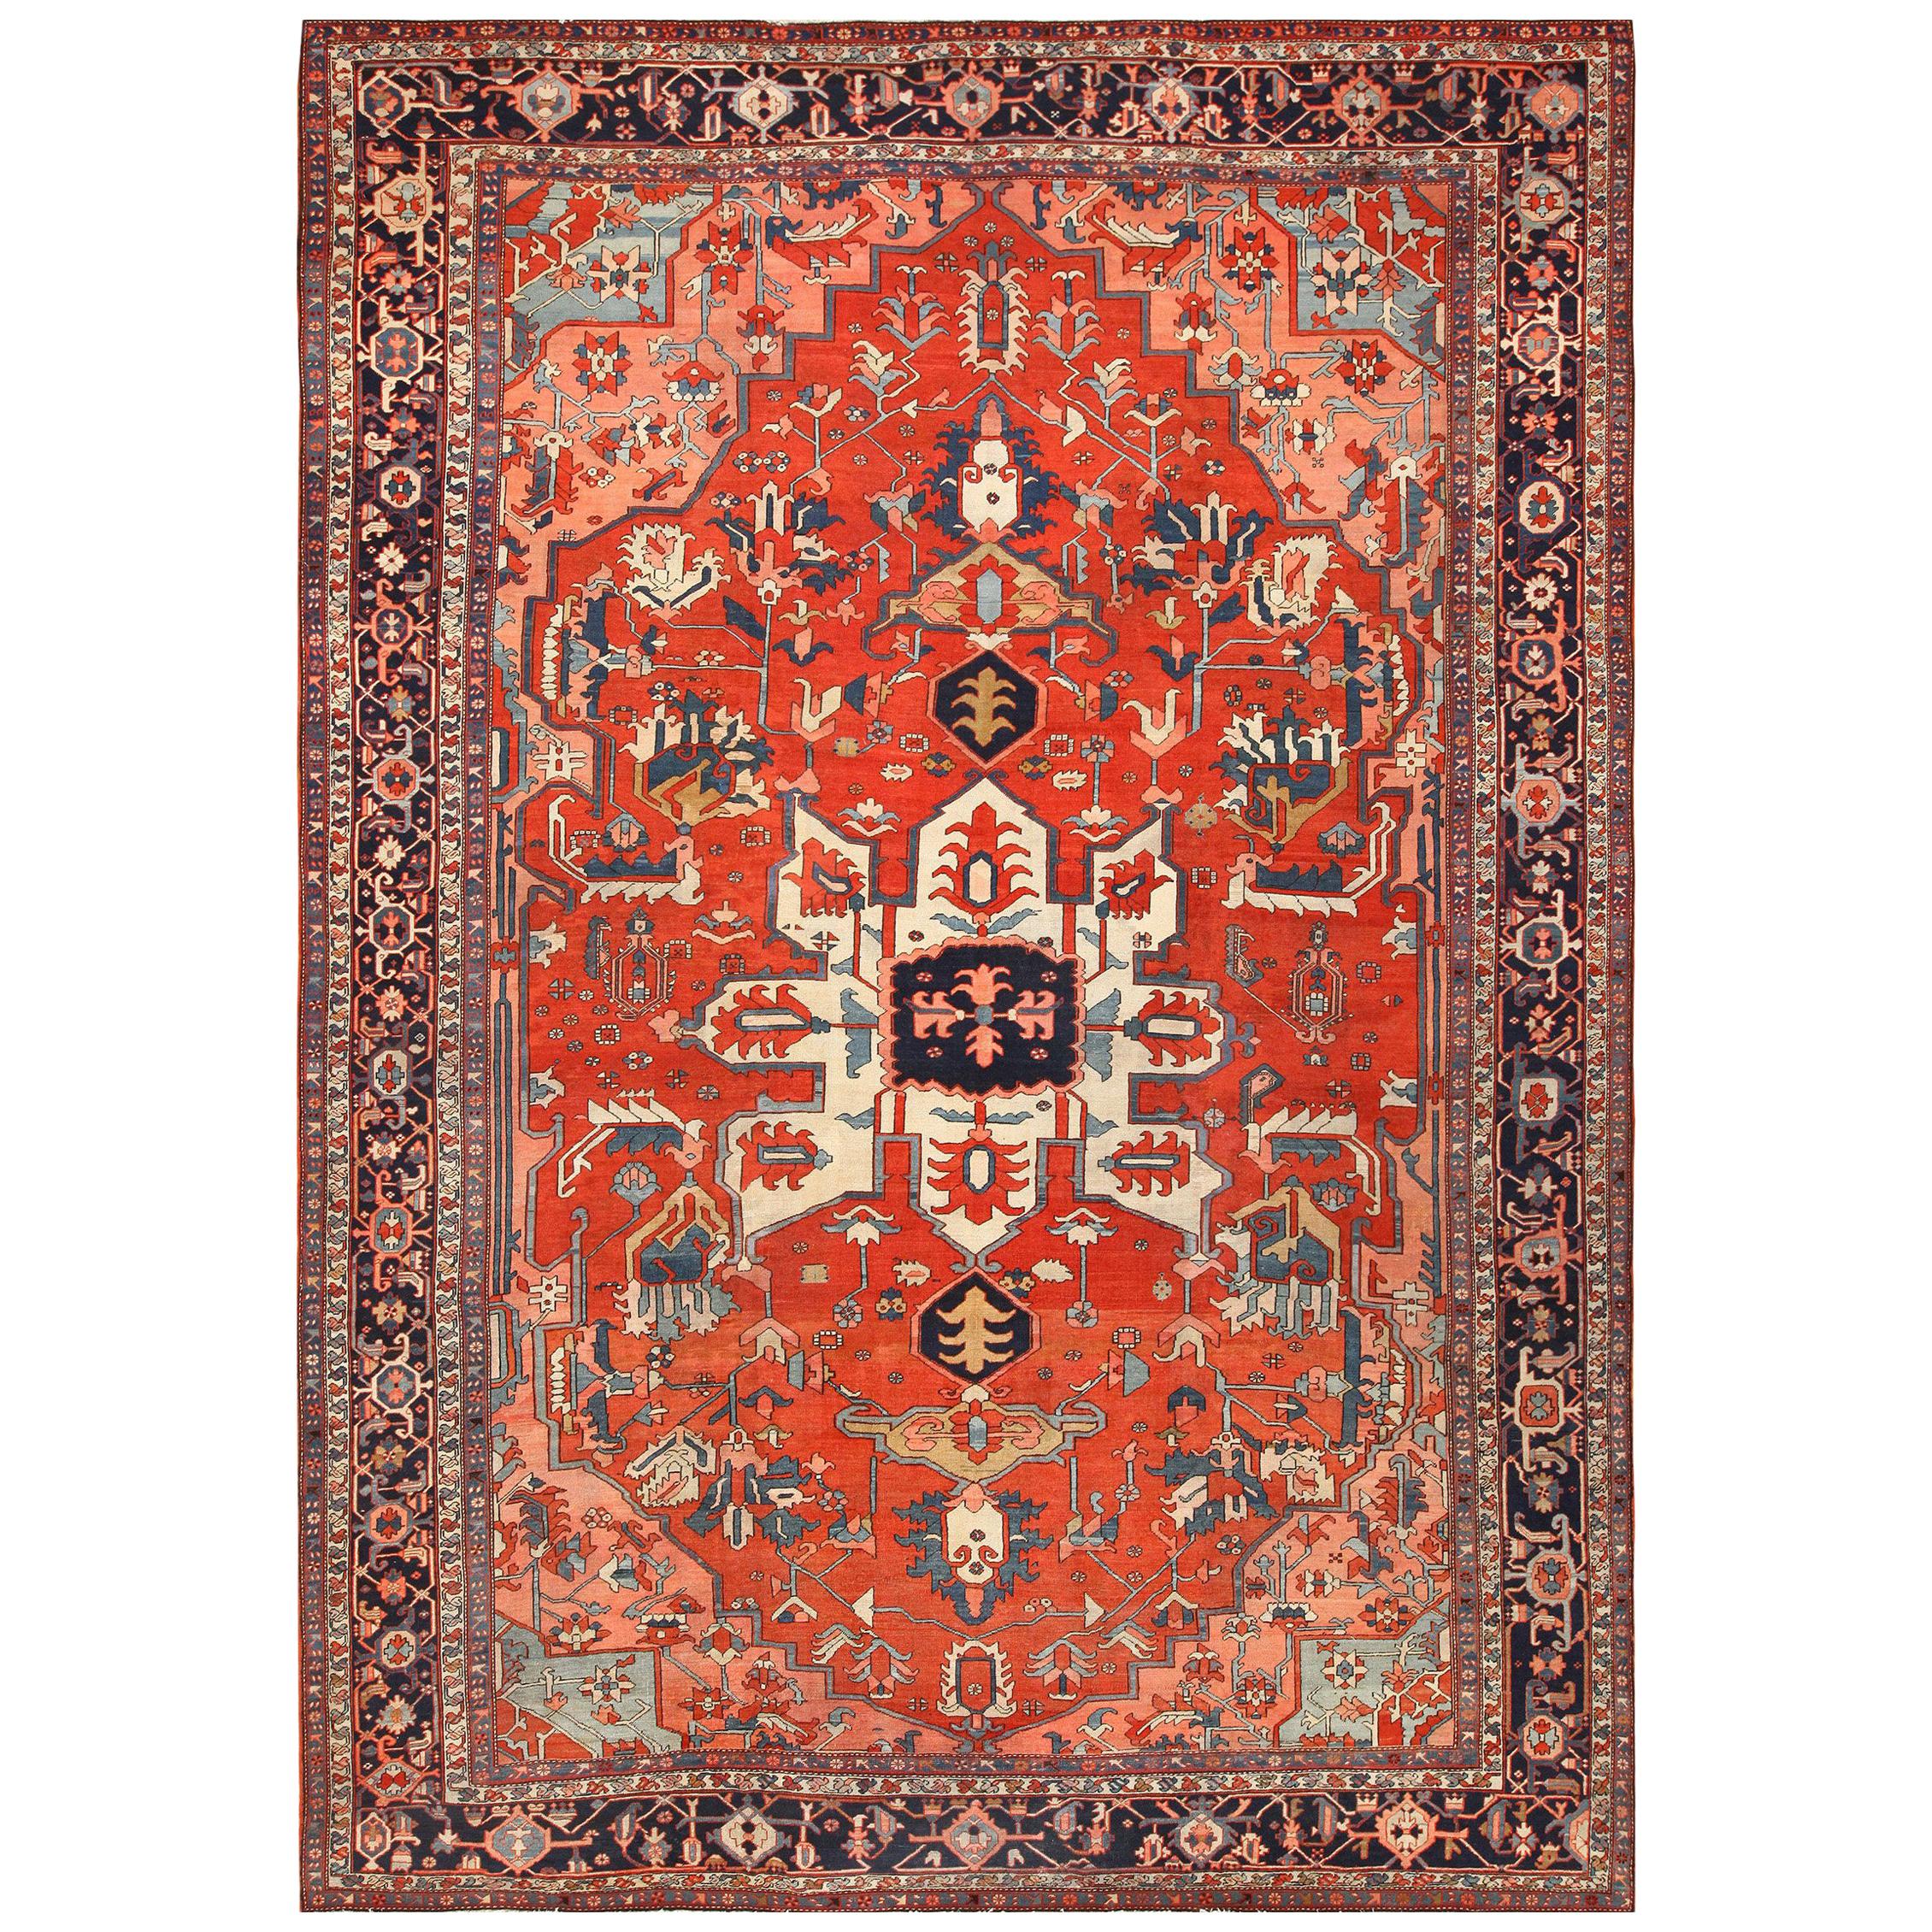 Nazmiyal Collection Antique Serapi Persian Rug. Size: 12 ft x 17 ft 6 in